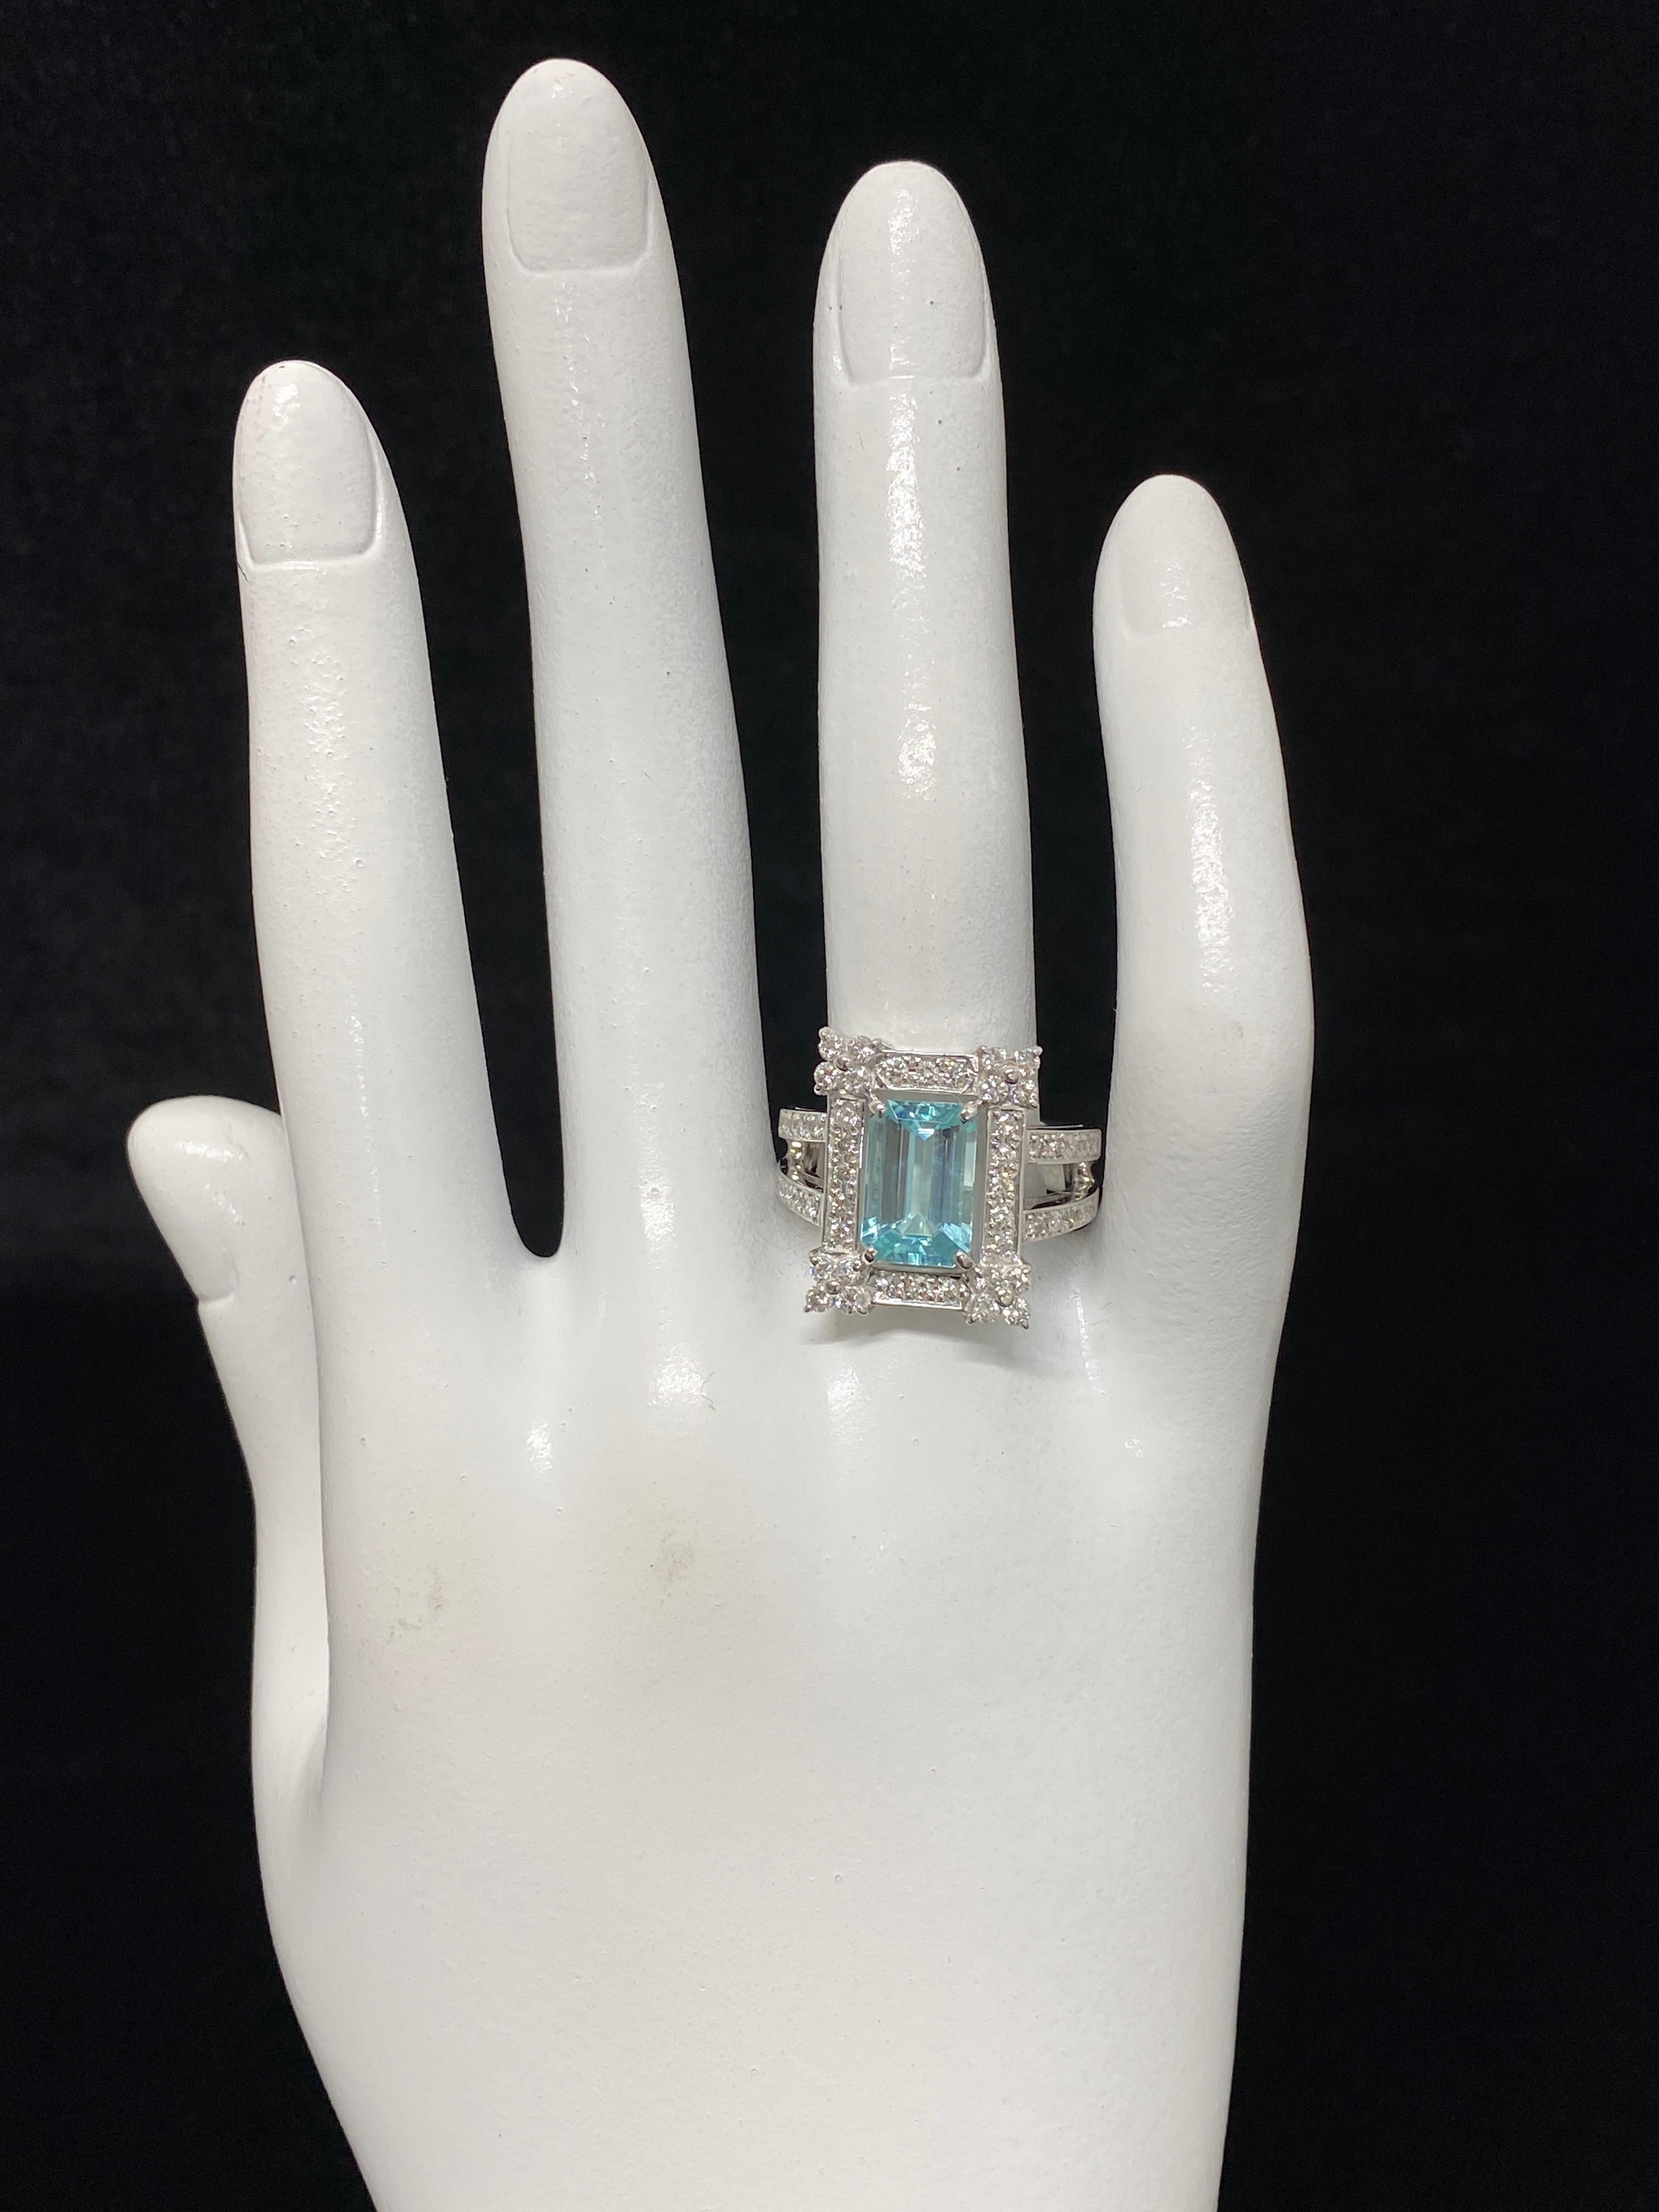 2.38 Carat Natural Paraiba Tourmaline and Diamond Ring Set in 18K White Gold For Sale 1